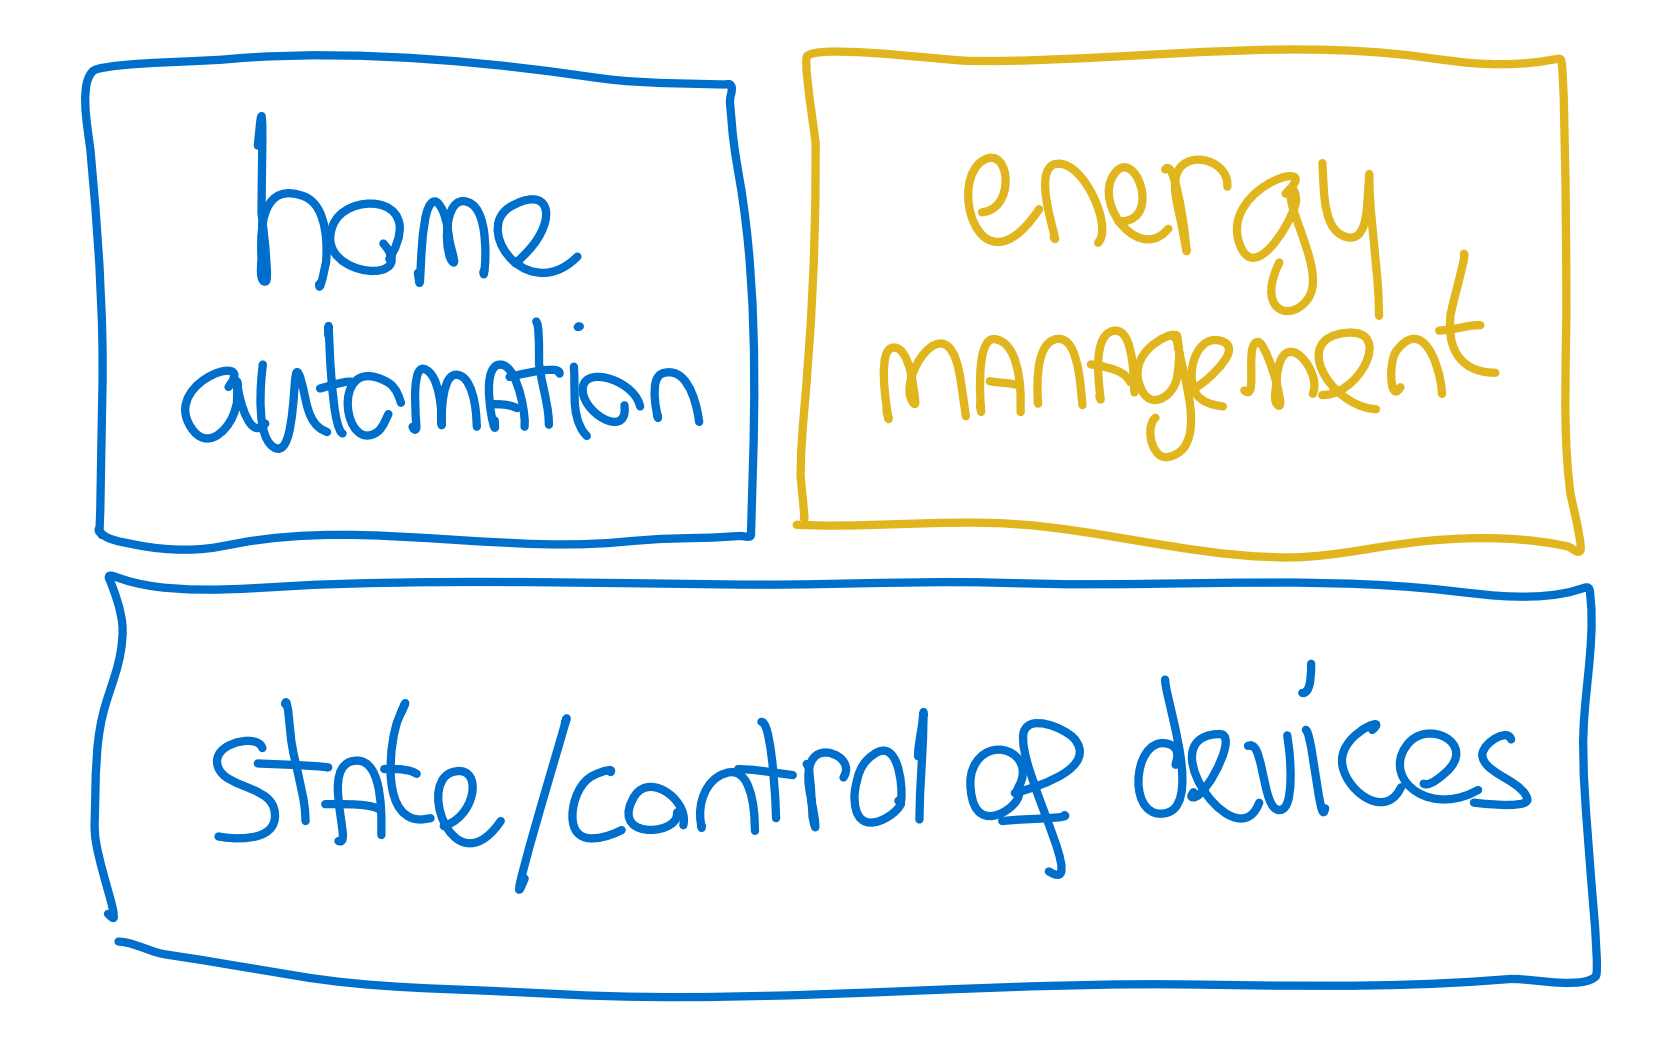 Diagram how both home automation and energy management use the same data.